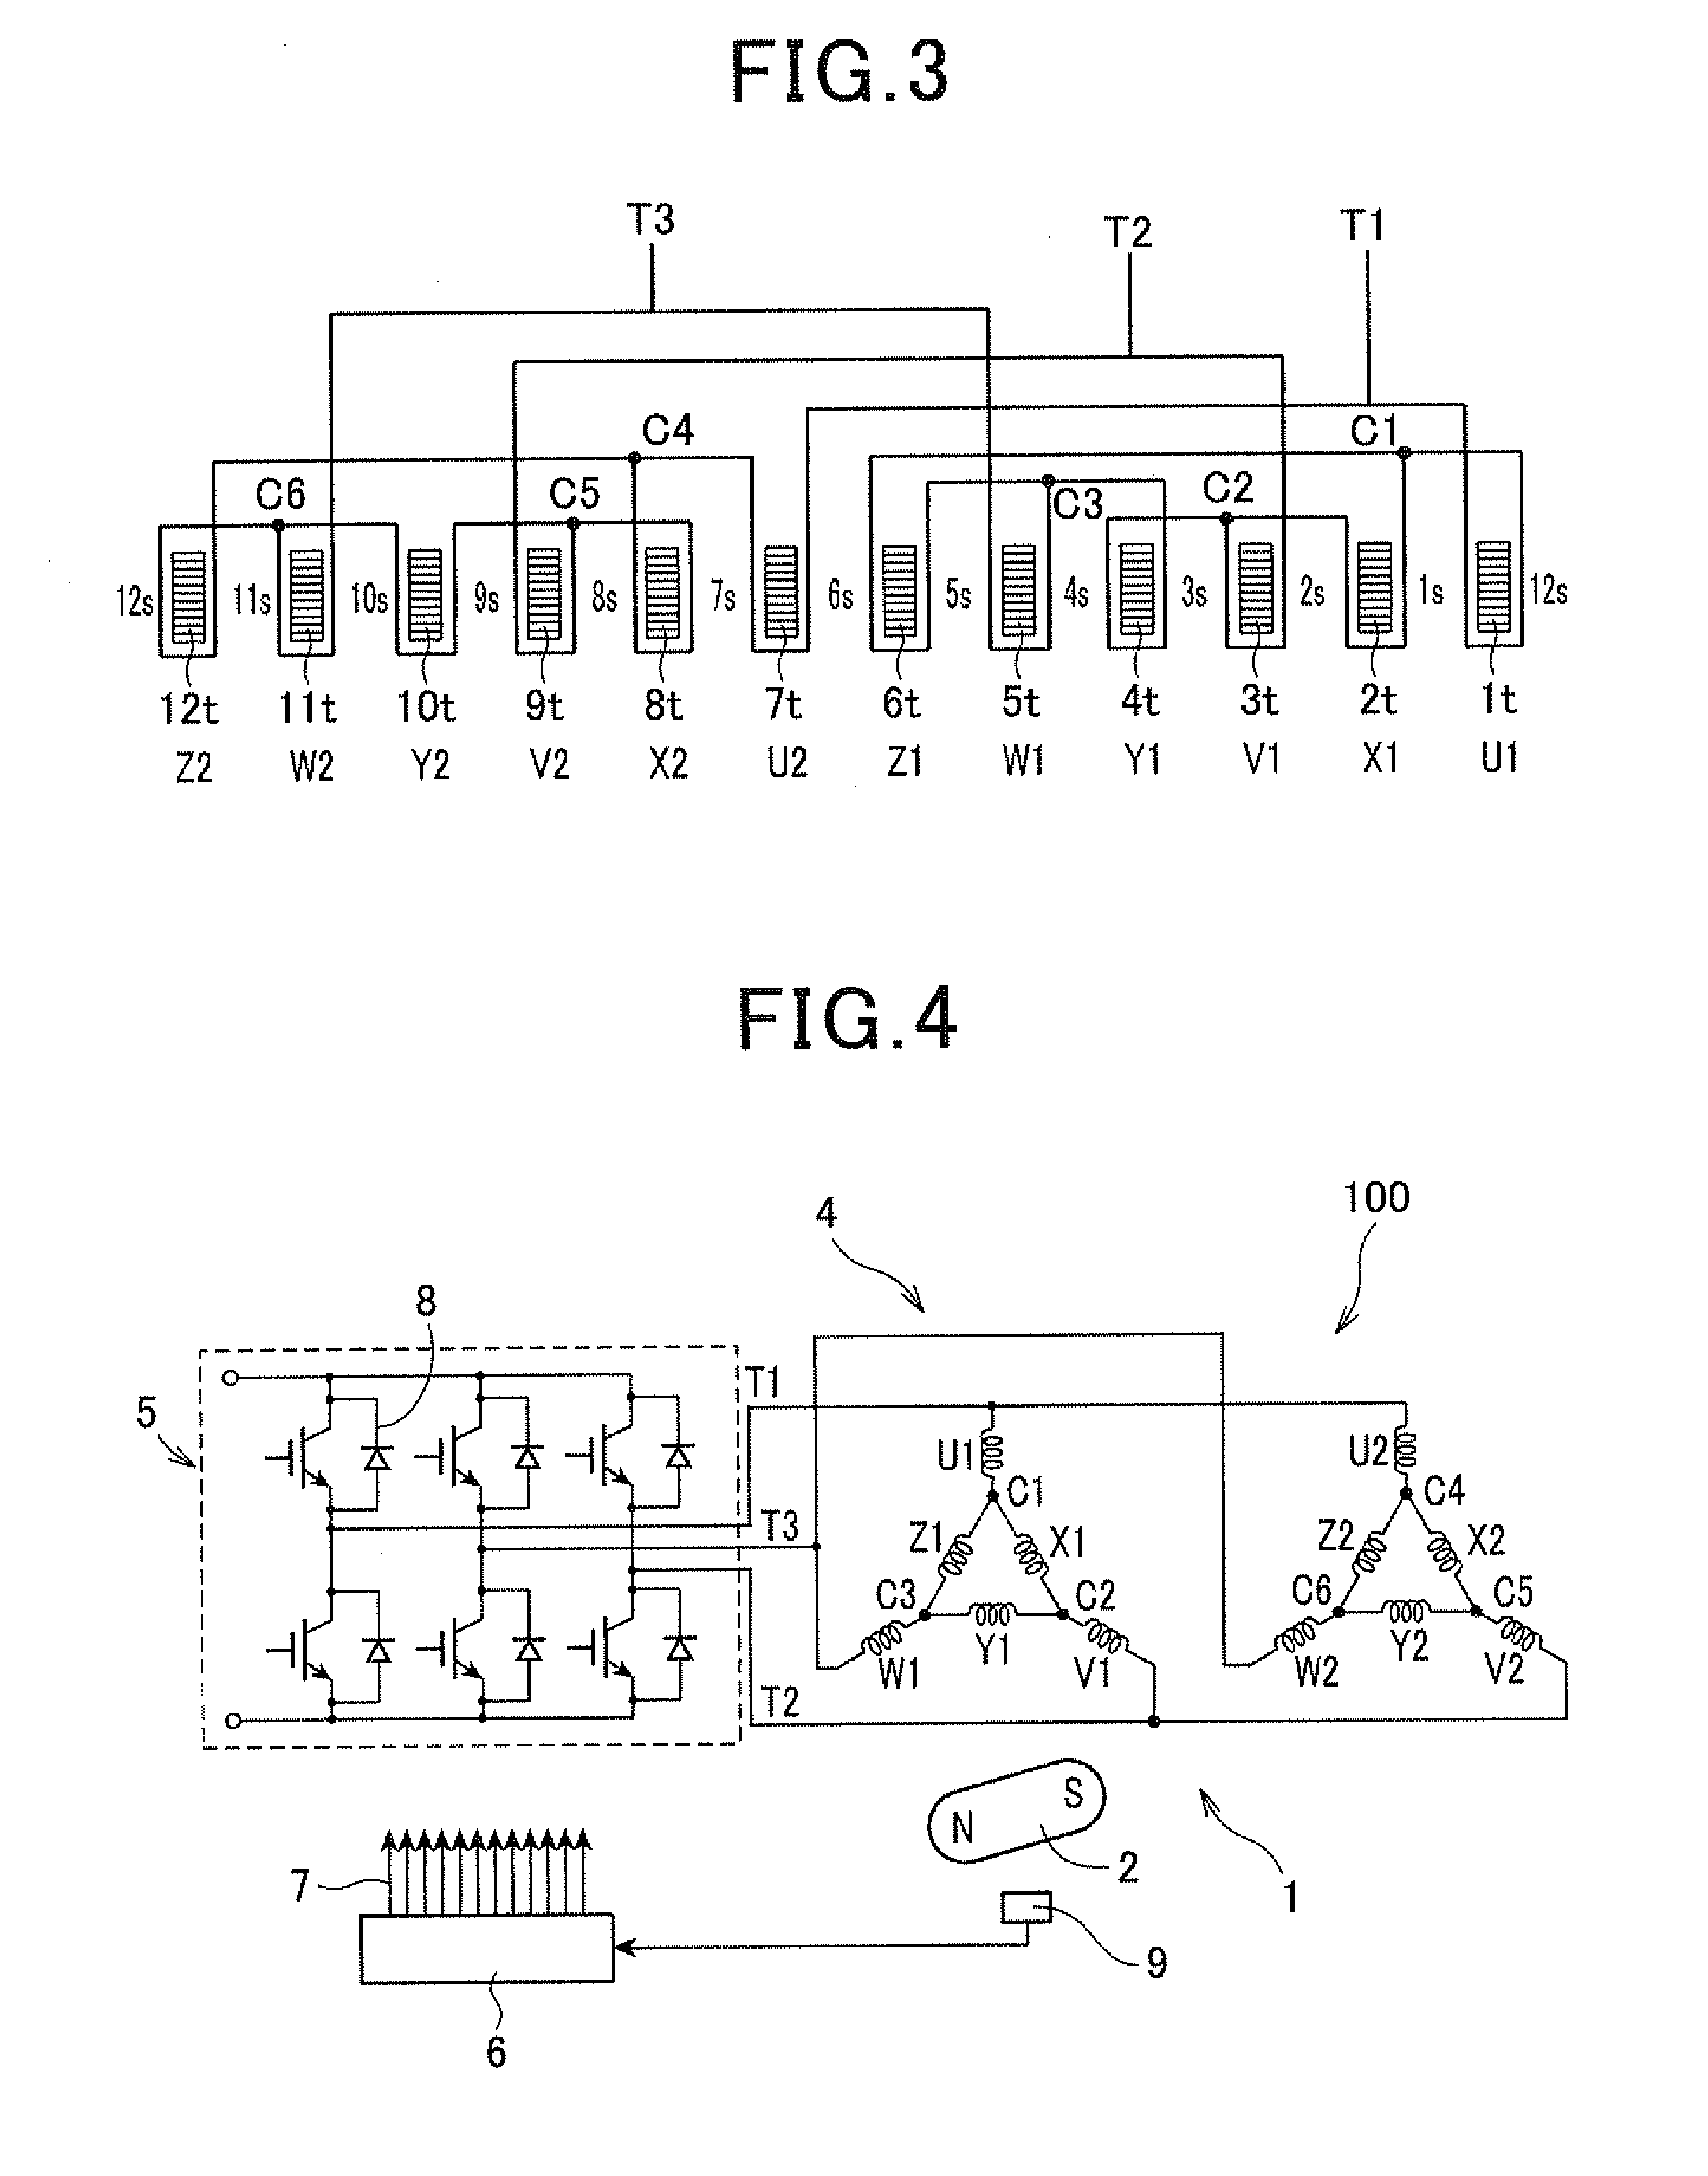 Electric rotating machine drivable with a single three-phase inverter